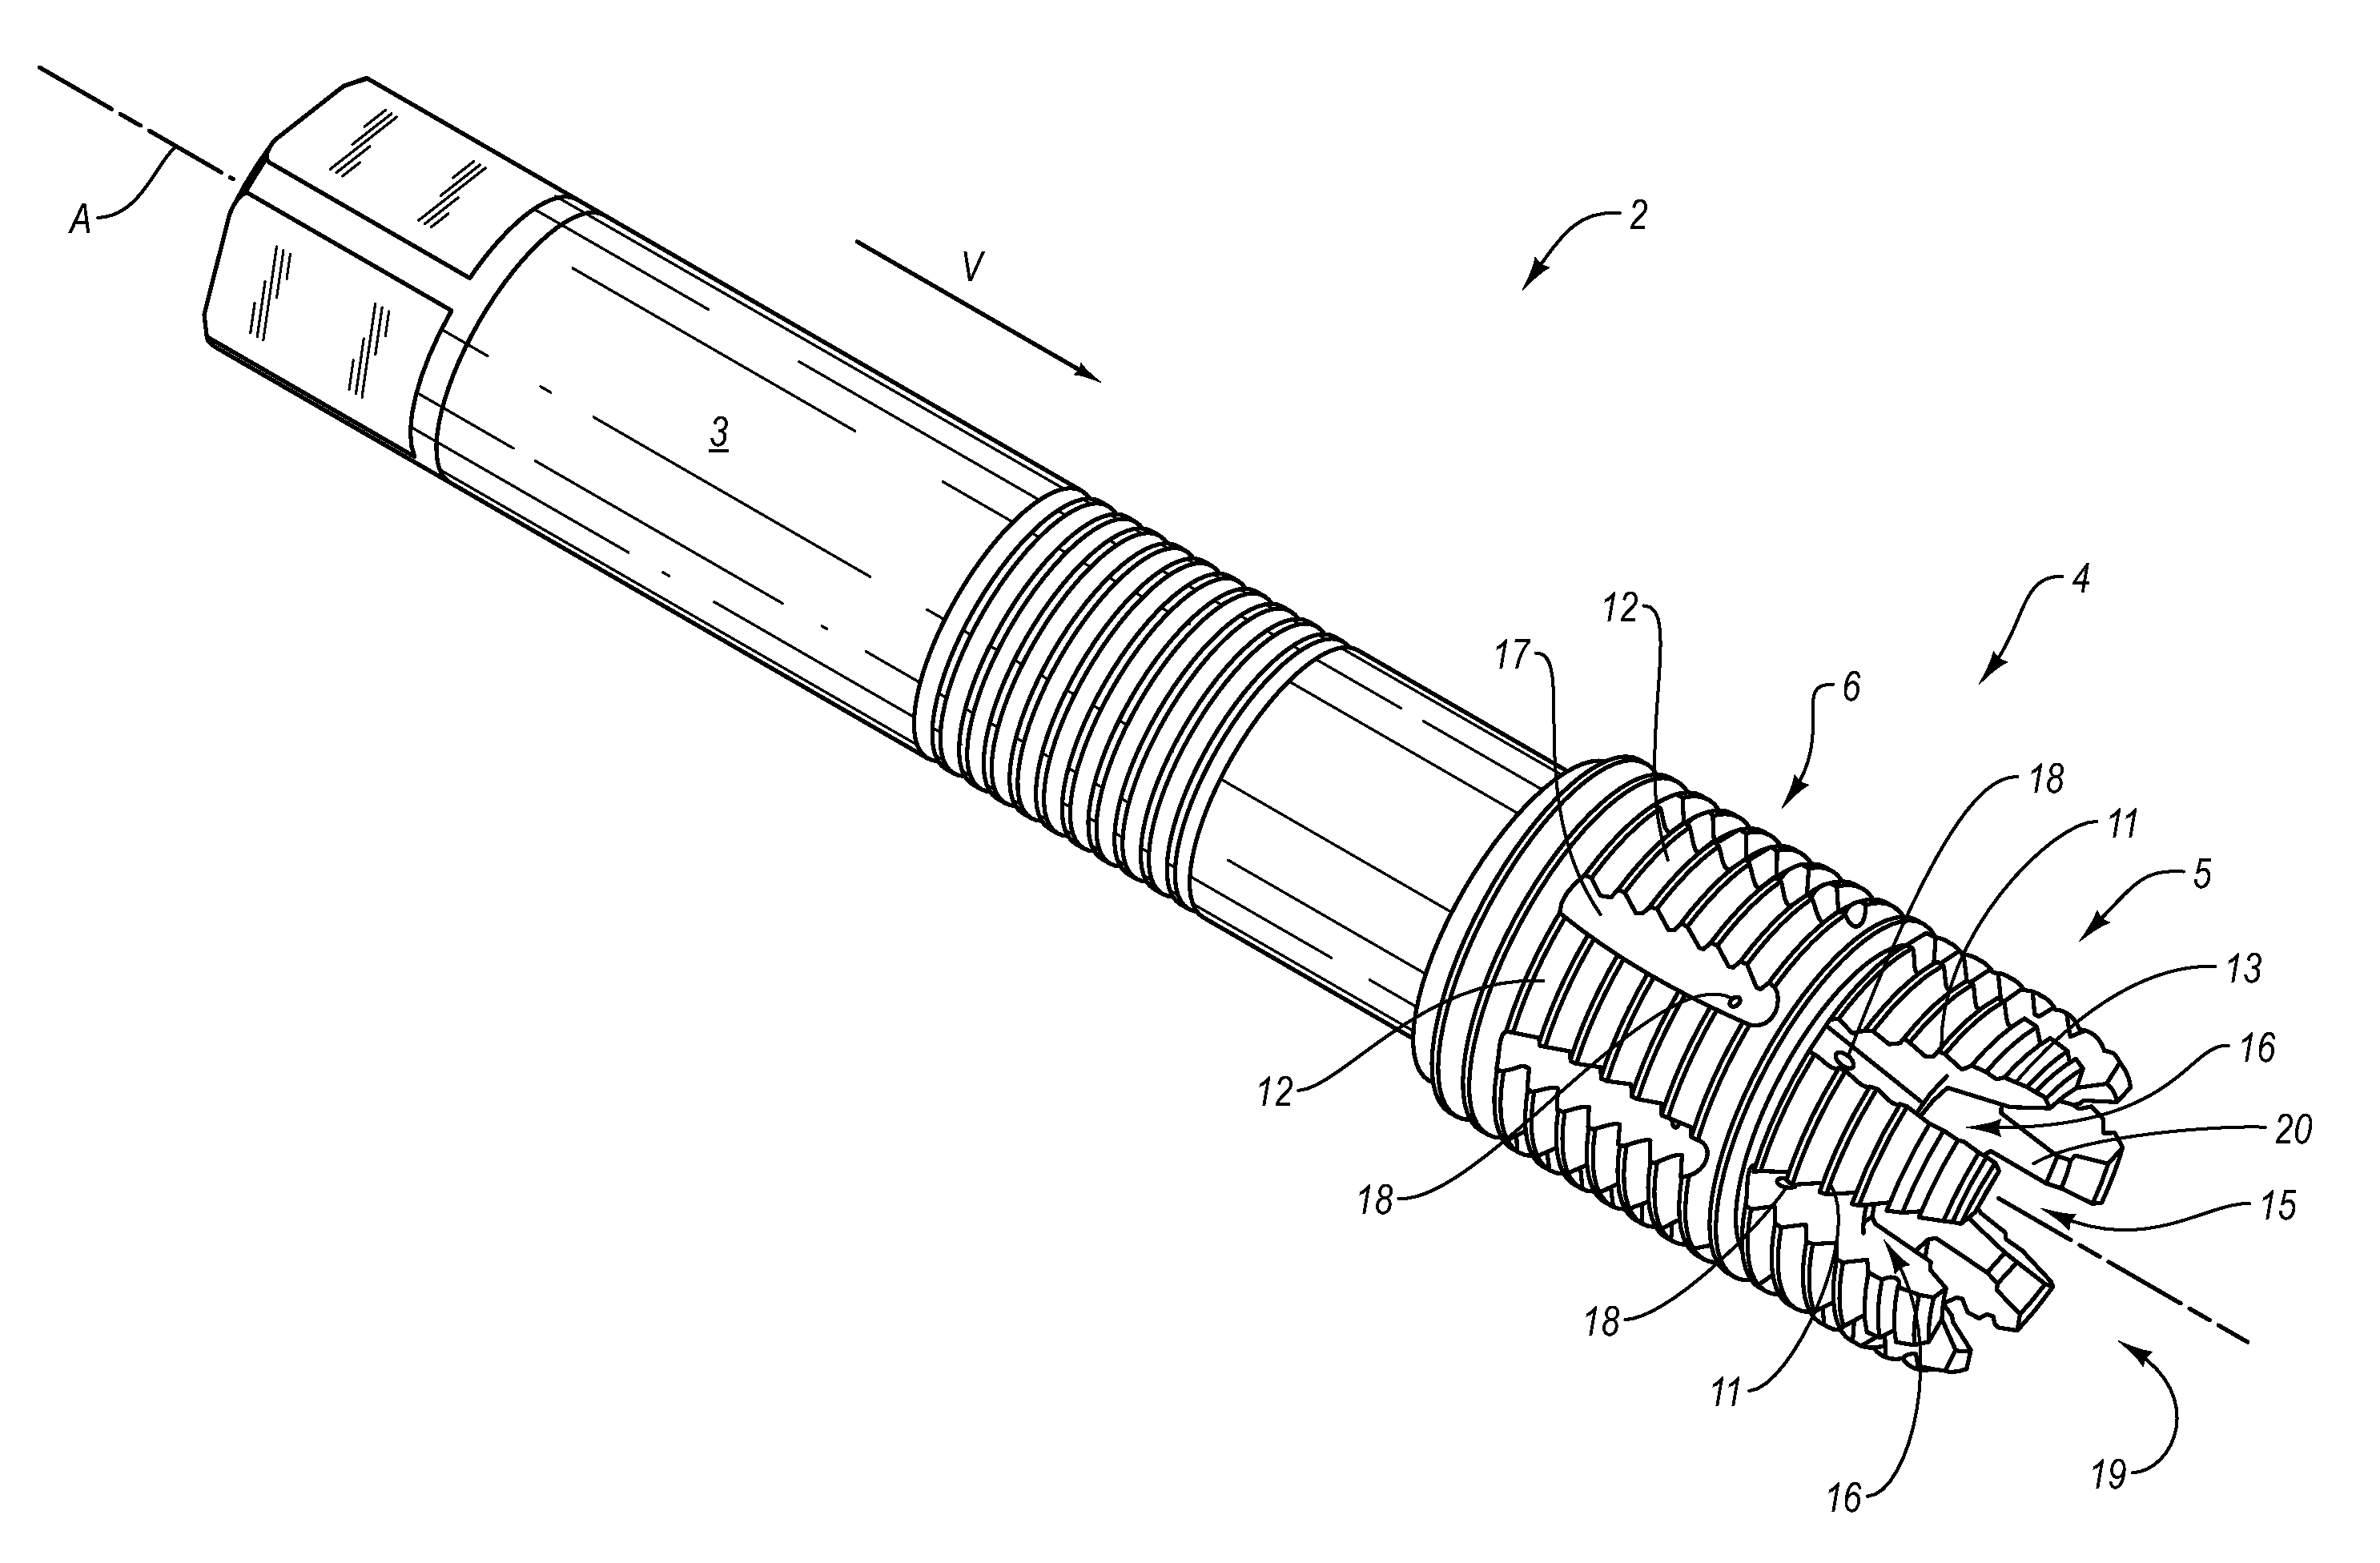 Combination tool with front-face recess